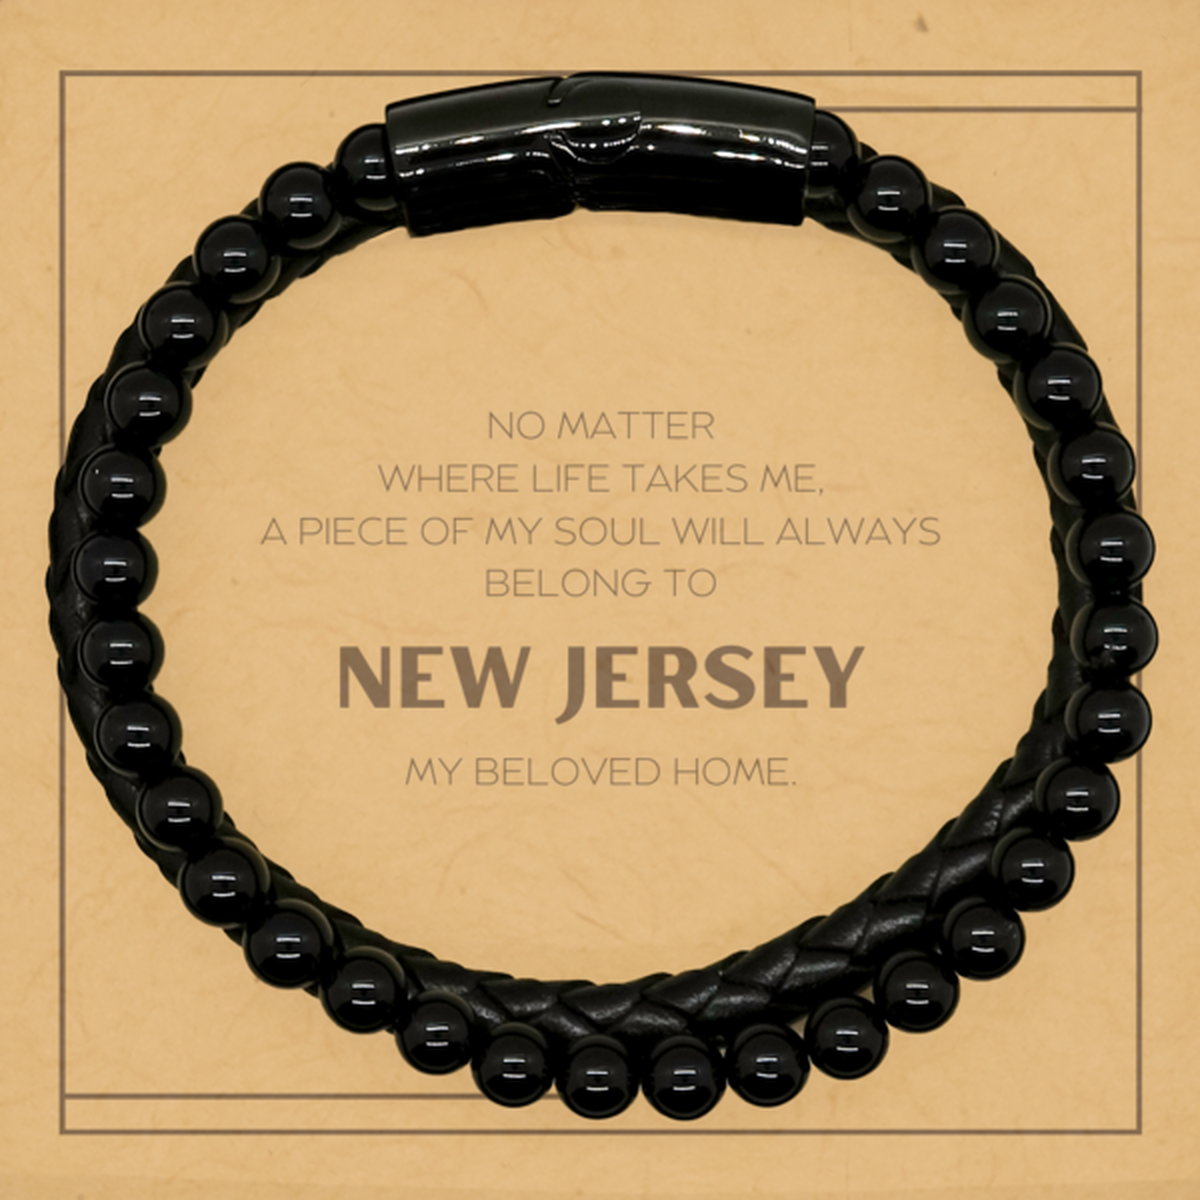 Love New Jersey State Gifts, My soul will always belong to New Jersey, Proud Stone Leather Bracelets, Birthday Unique Gifts For New Jersey Men, Women, Friends